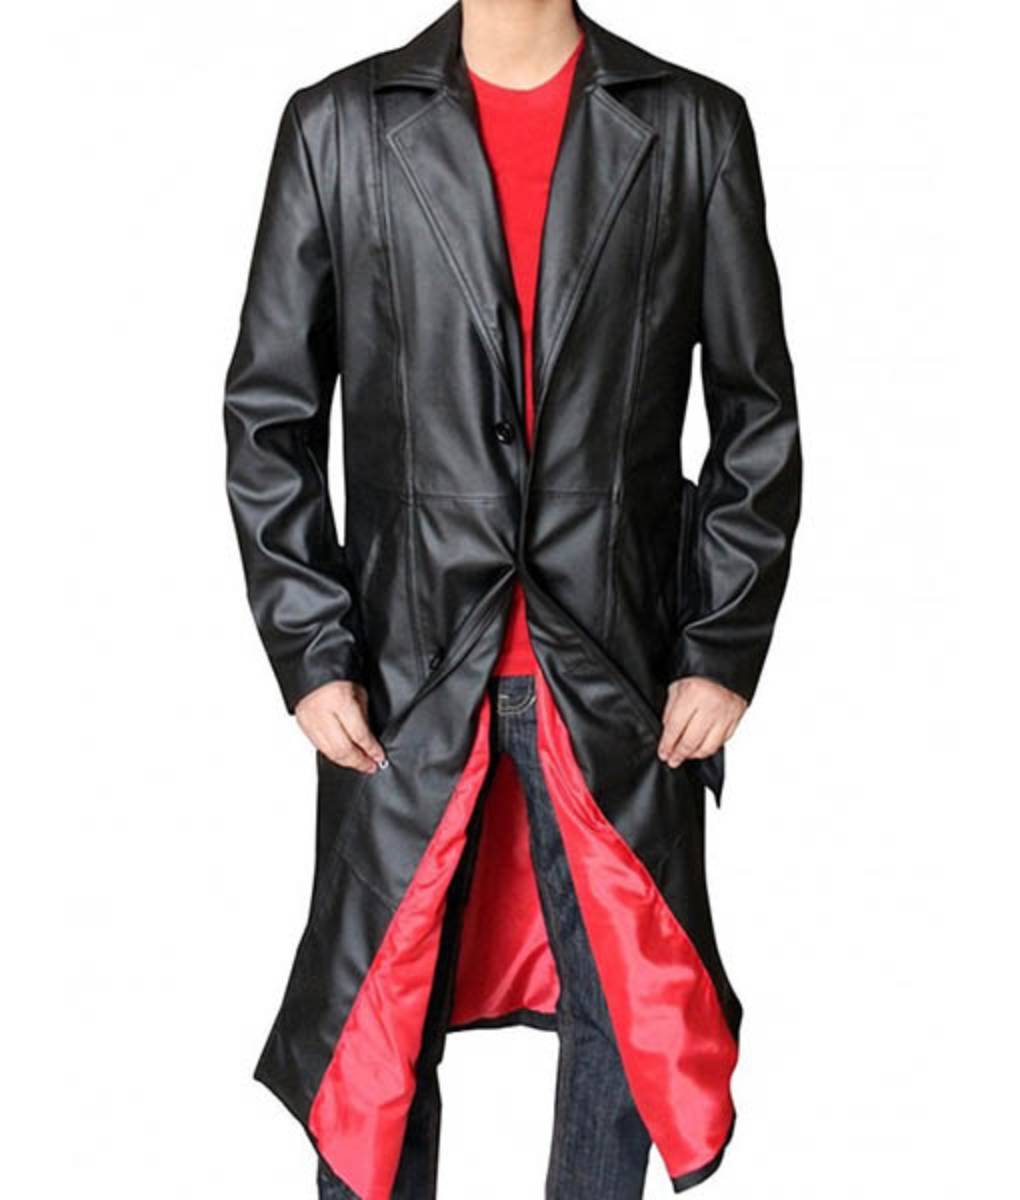 Wesley-Snipes-Blade-Trench-Coat-4